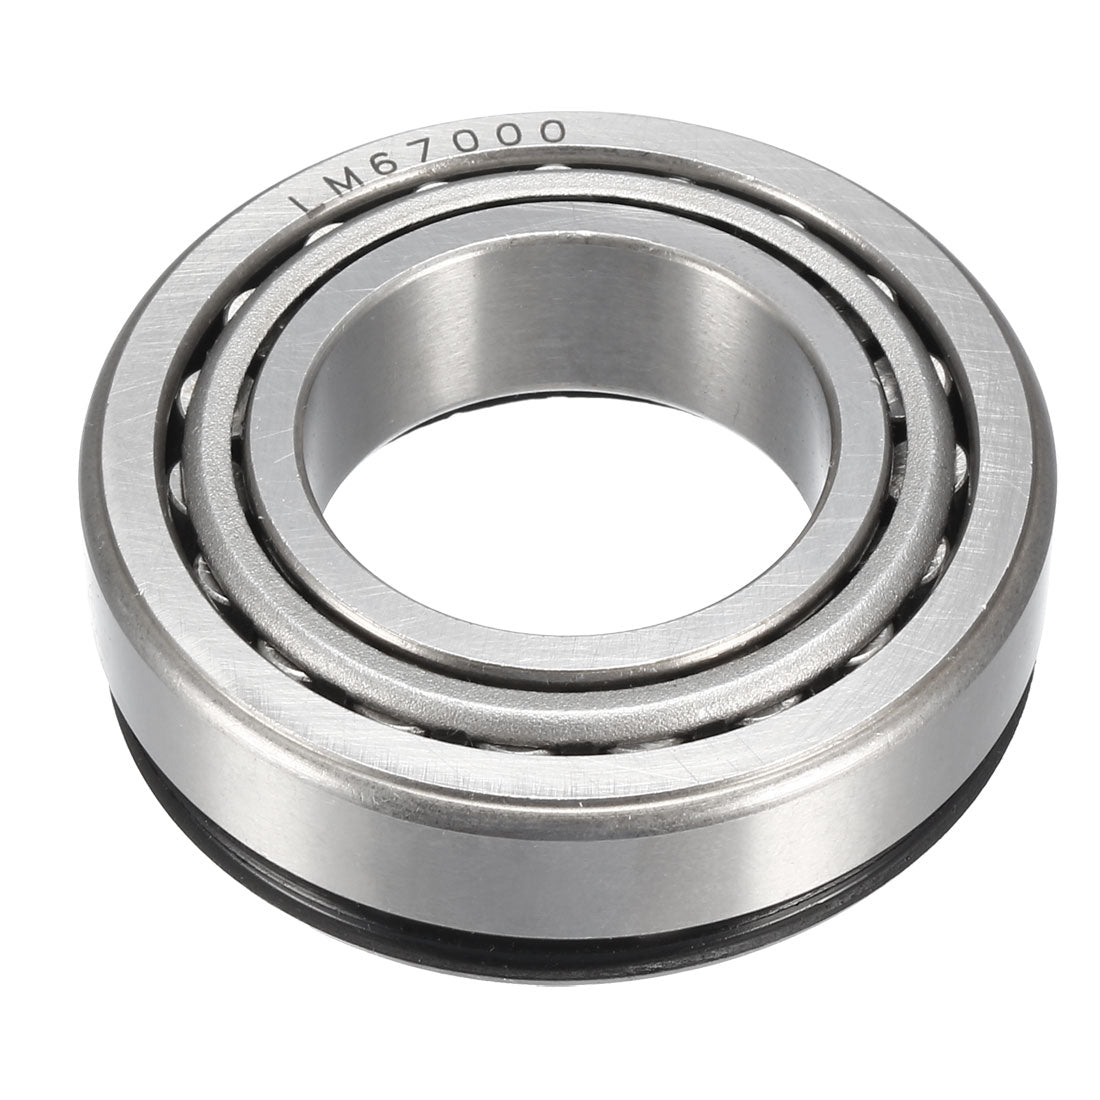 uxcell Uxcell LM67000LA-902A1 Tapered Roller Bearing Cone and Cup Set 1.25" Bore 2.328" O.D.